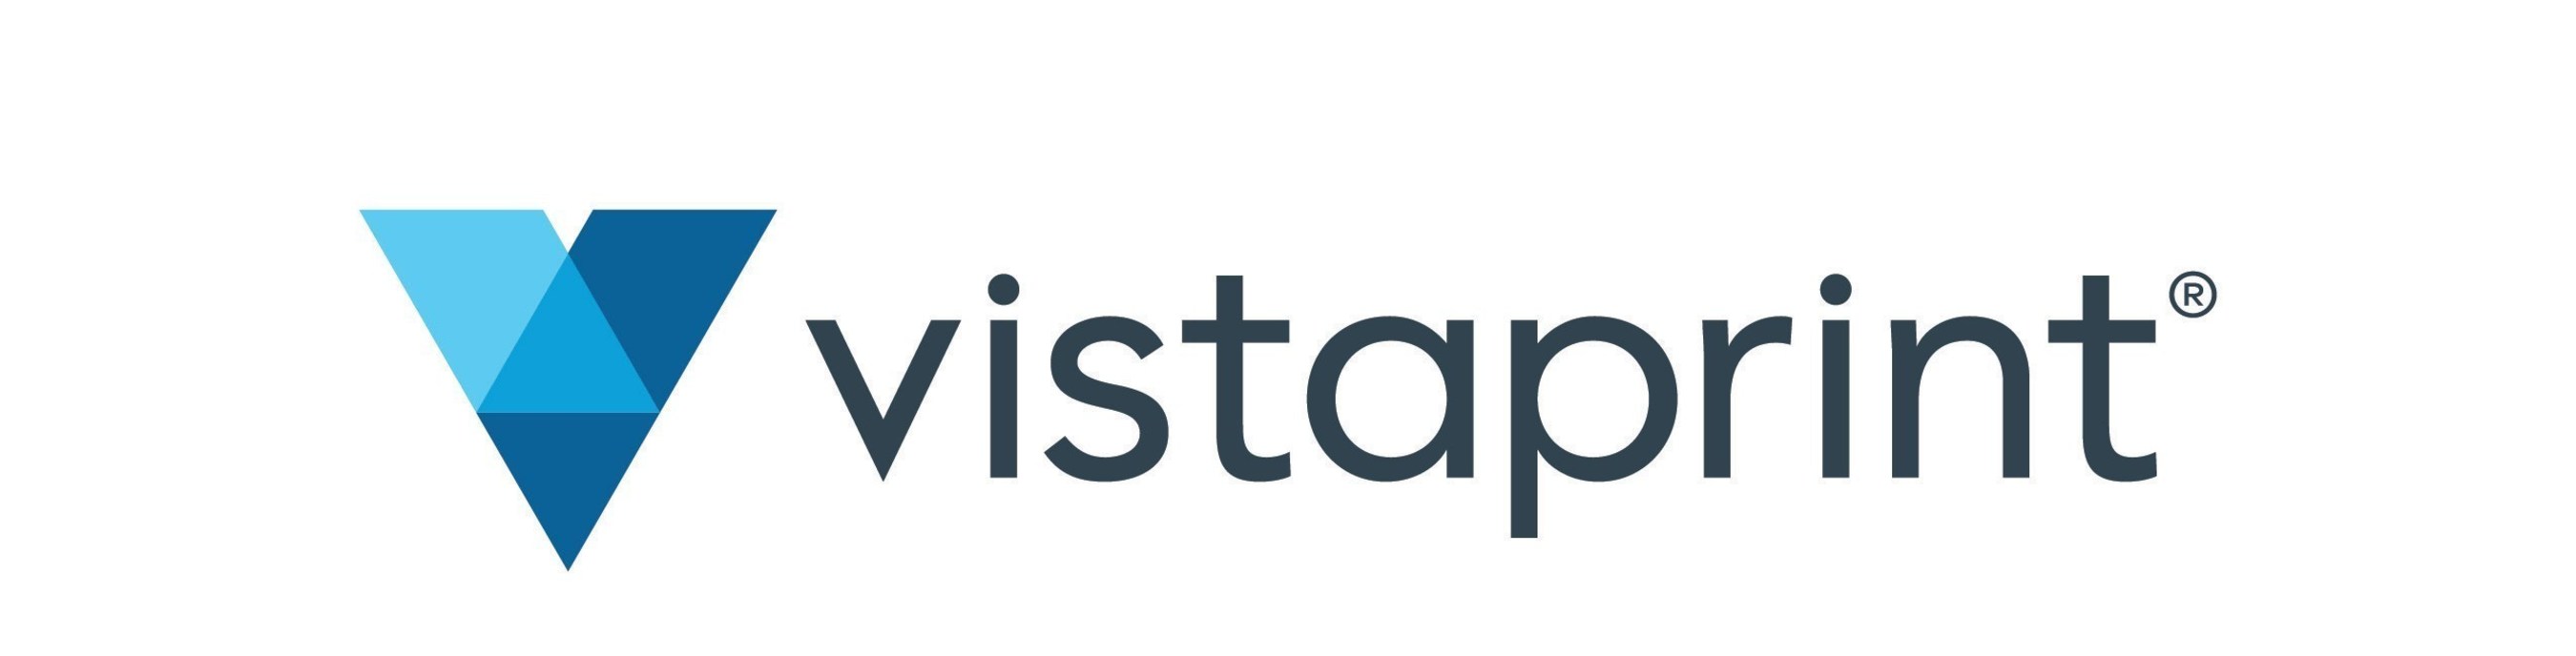 Vistaprint Launches Game-Changing New Website Builder That Connects Print and Digital